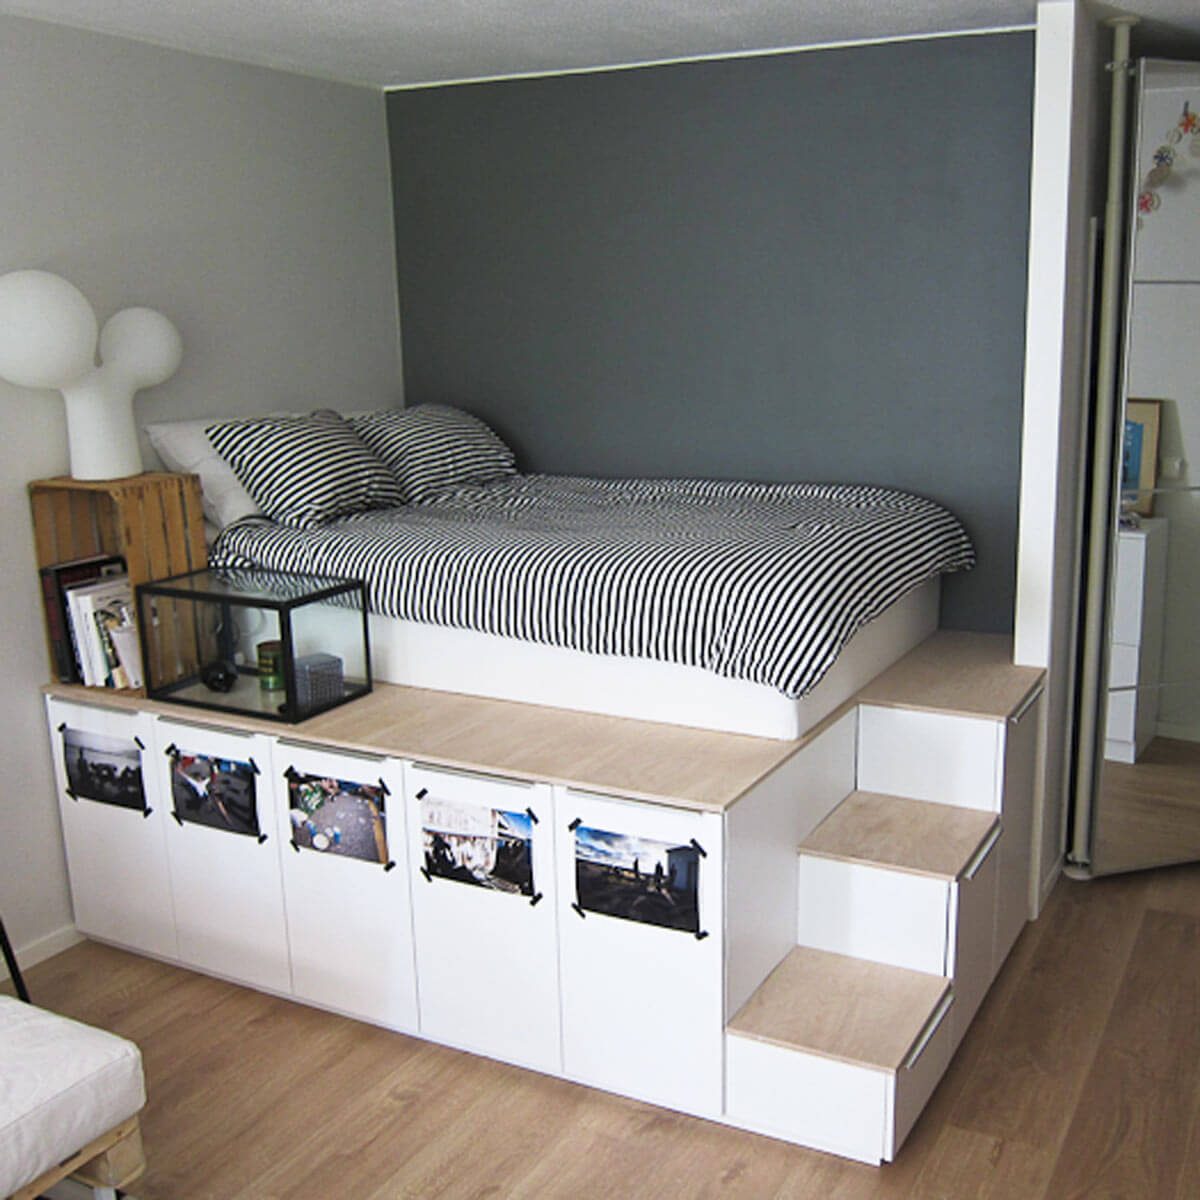 11 Great DIY Bed Frame Plans and Ideas — The Family Handyman